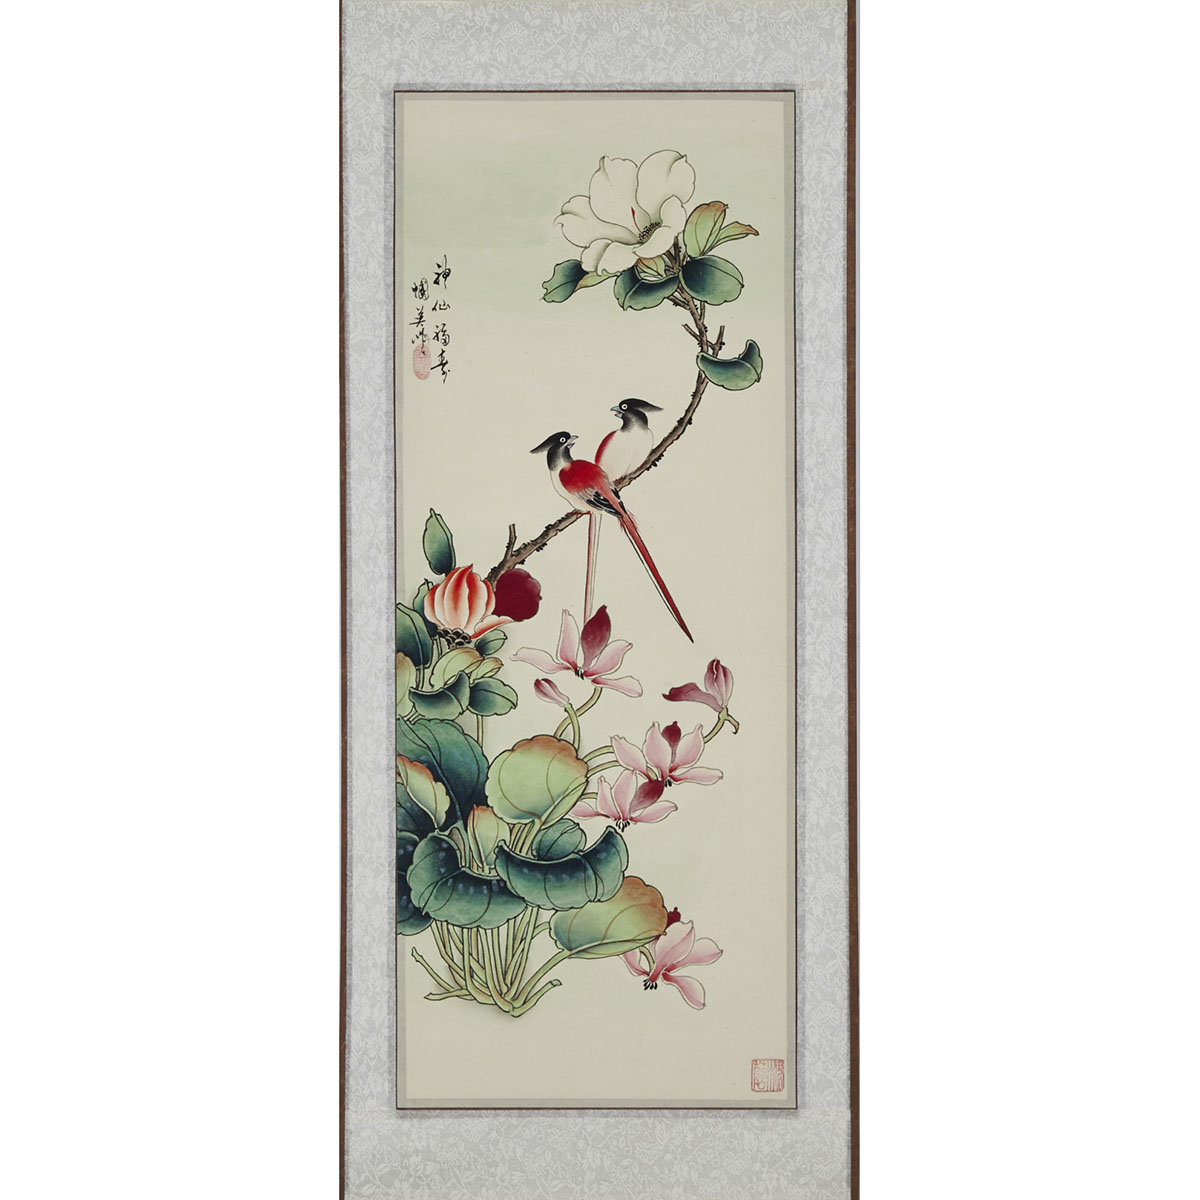 Pair of Japanese Scroll Paintings and a Framed Landscape Print